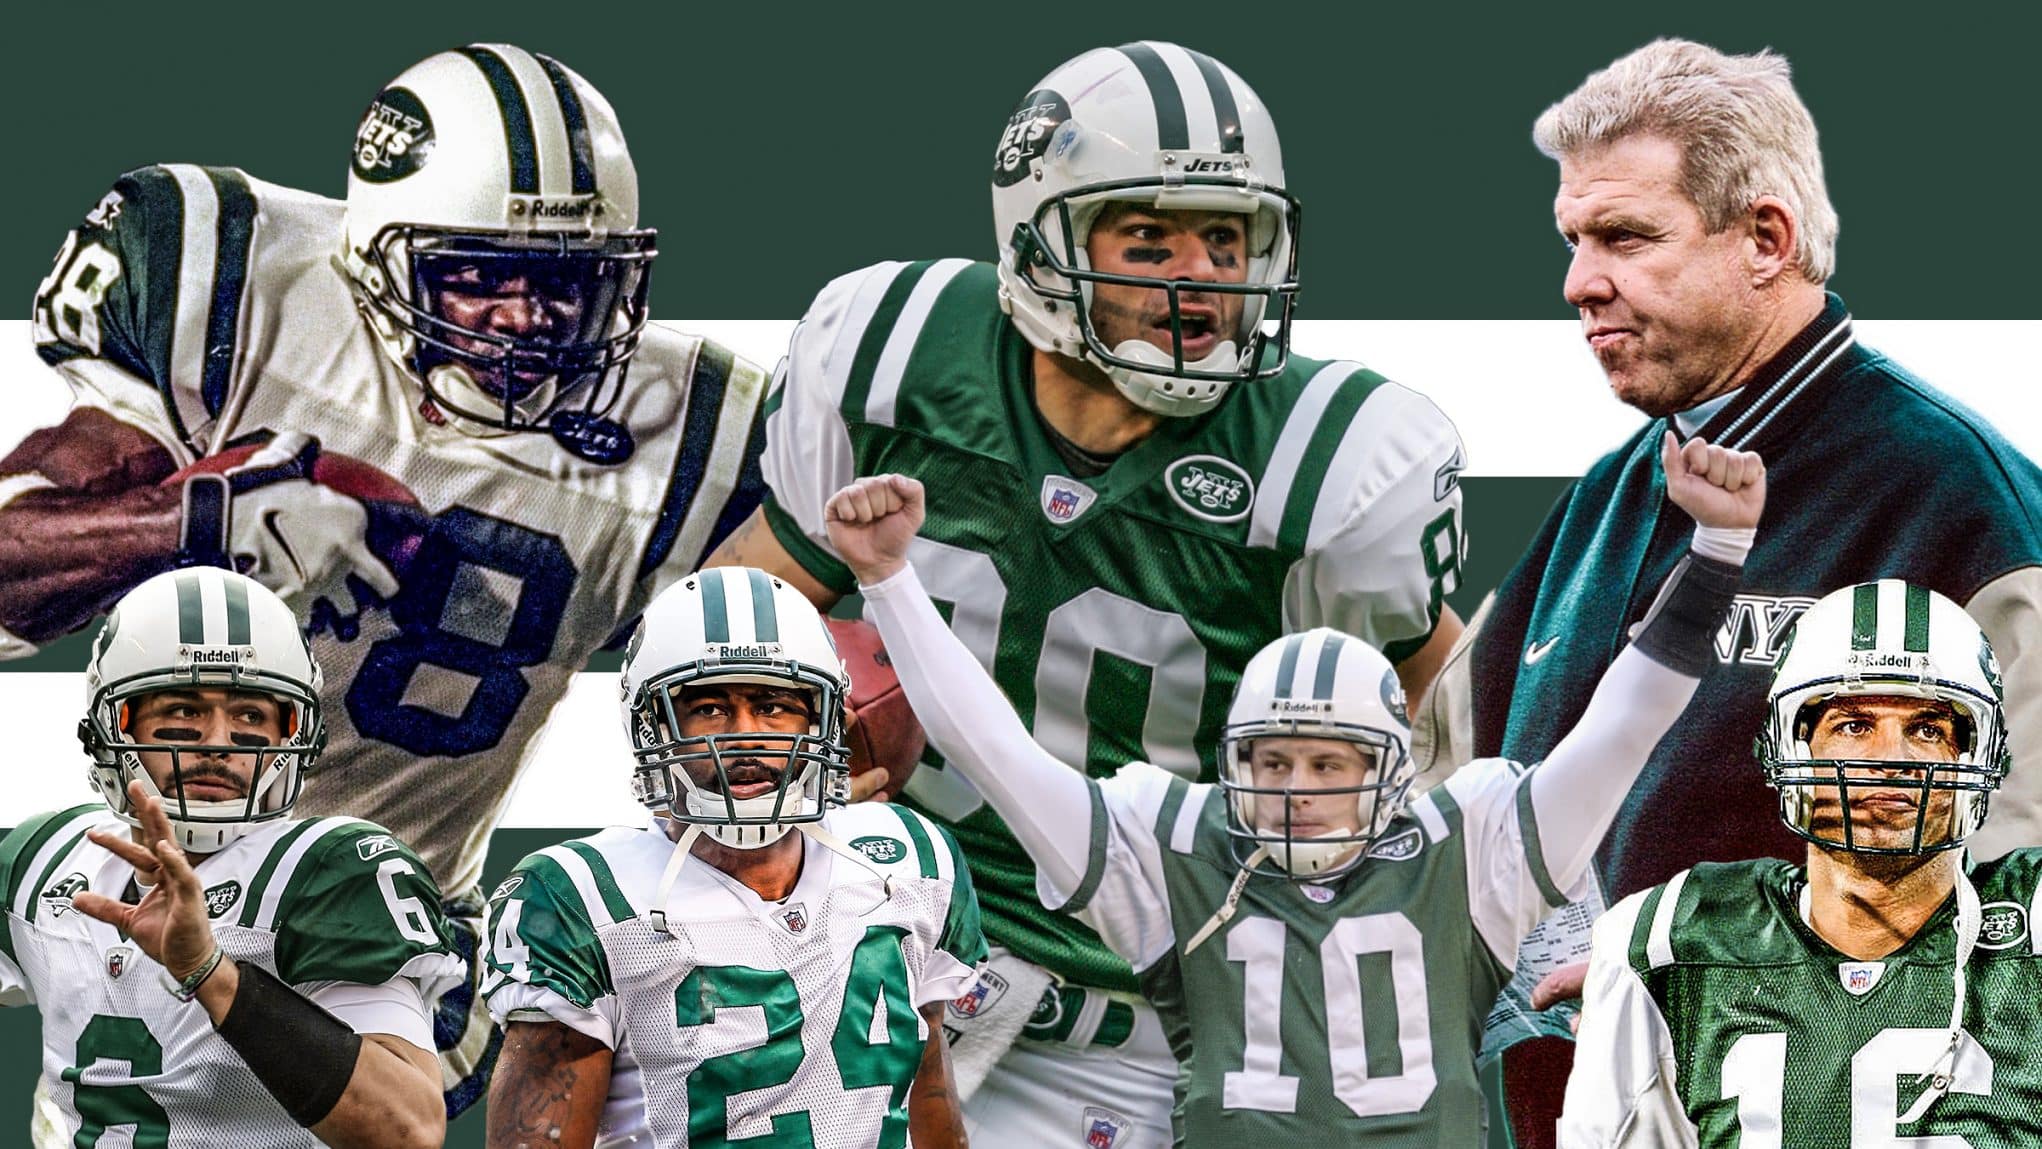 jets uniforms over the years